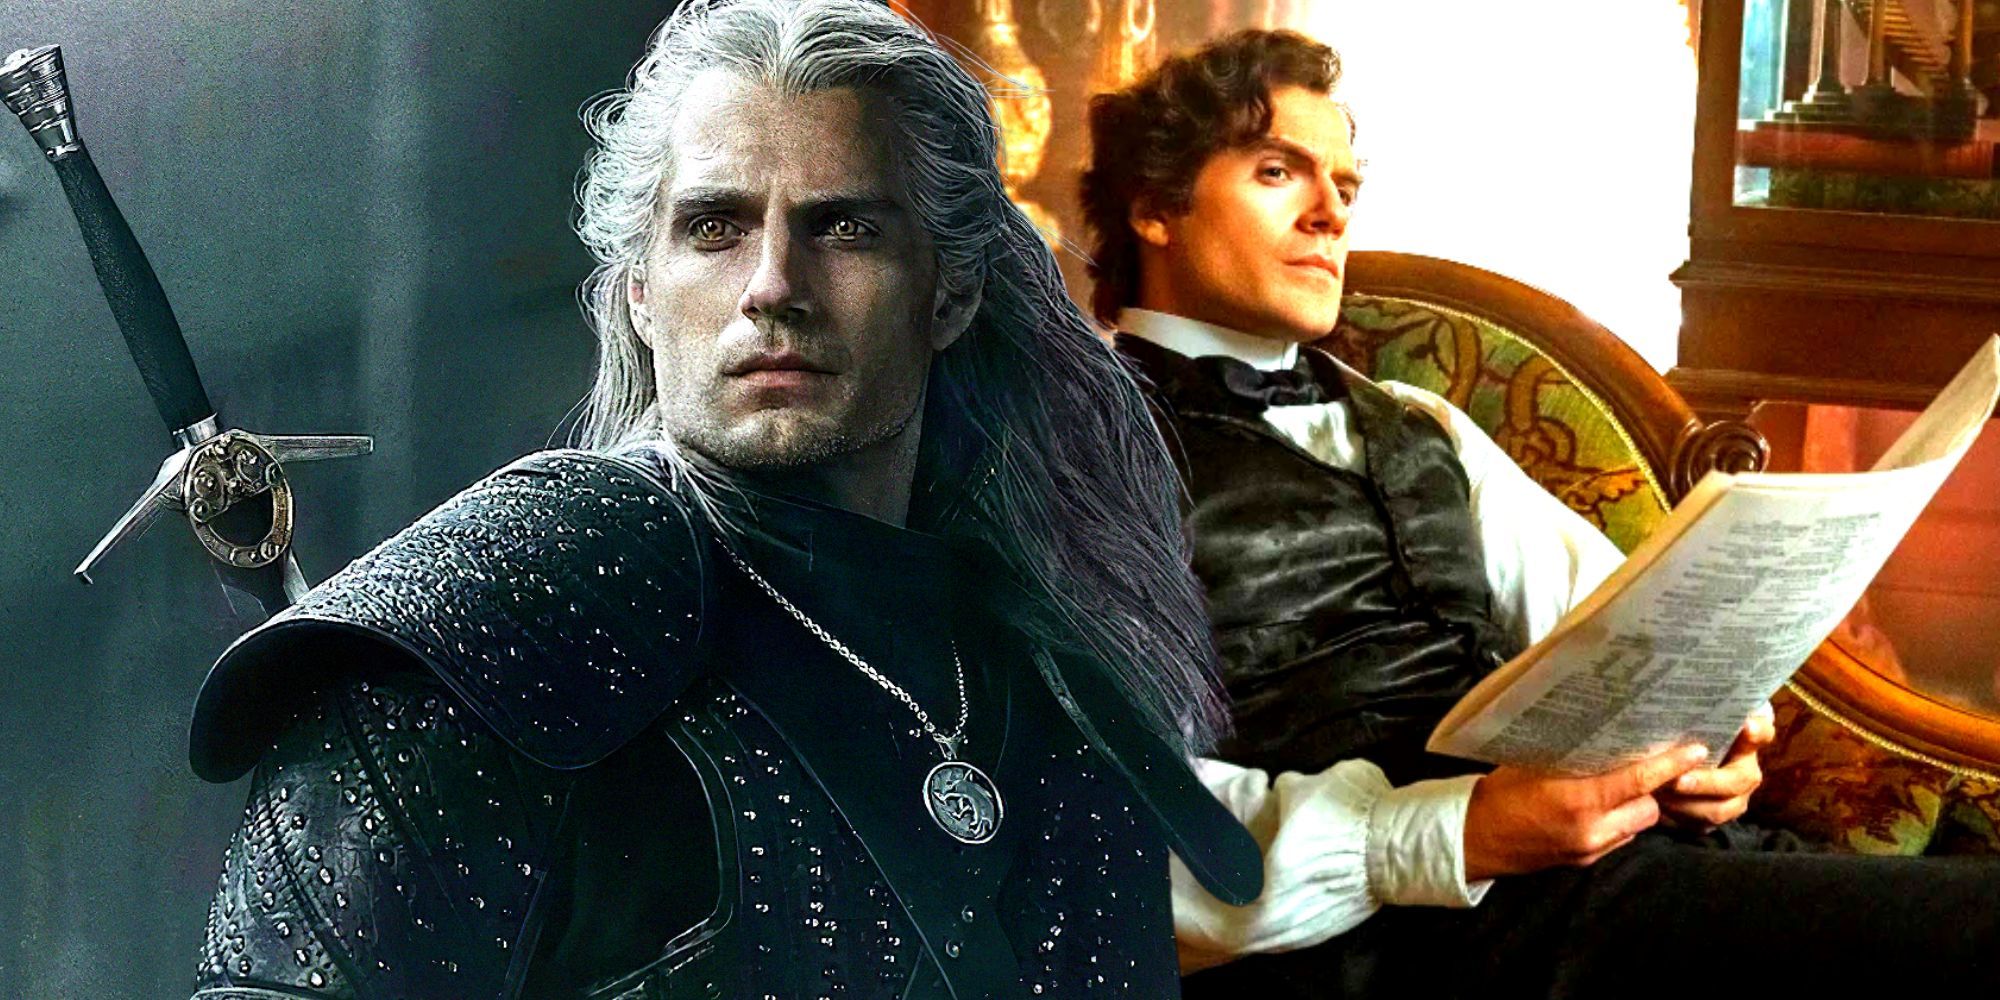 Henry-Cavill-Geralt-of-Rivia-The-Witcher-Enola-Holmes-Sherlock-Holmes-1